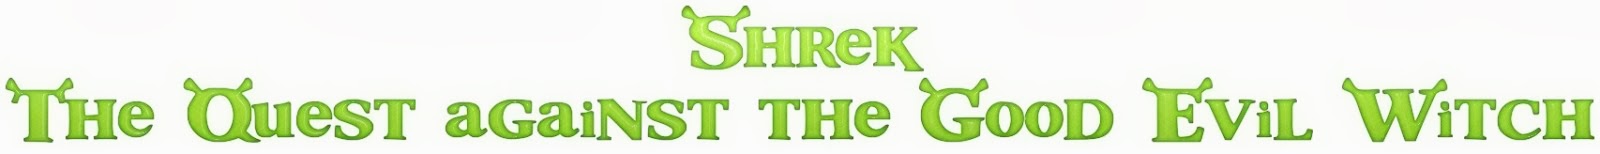 Shrek - The Quest against the Good-Evil Witch